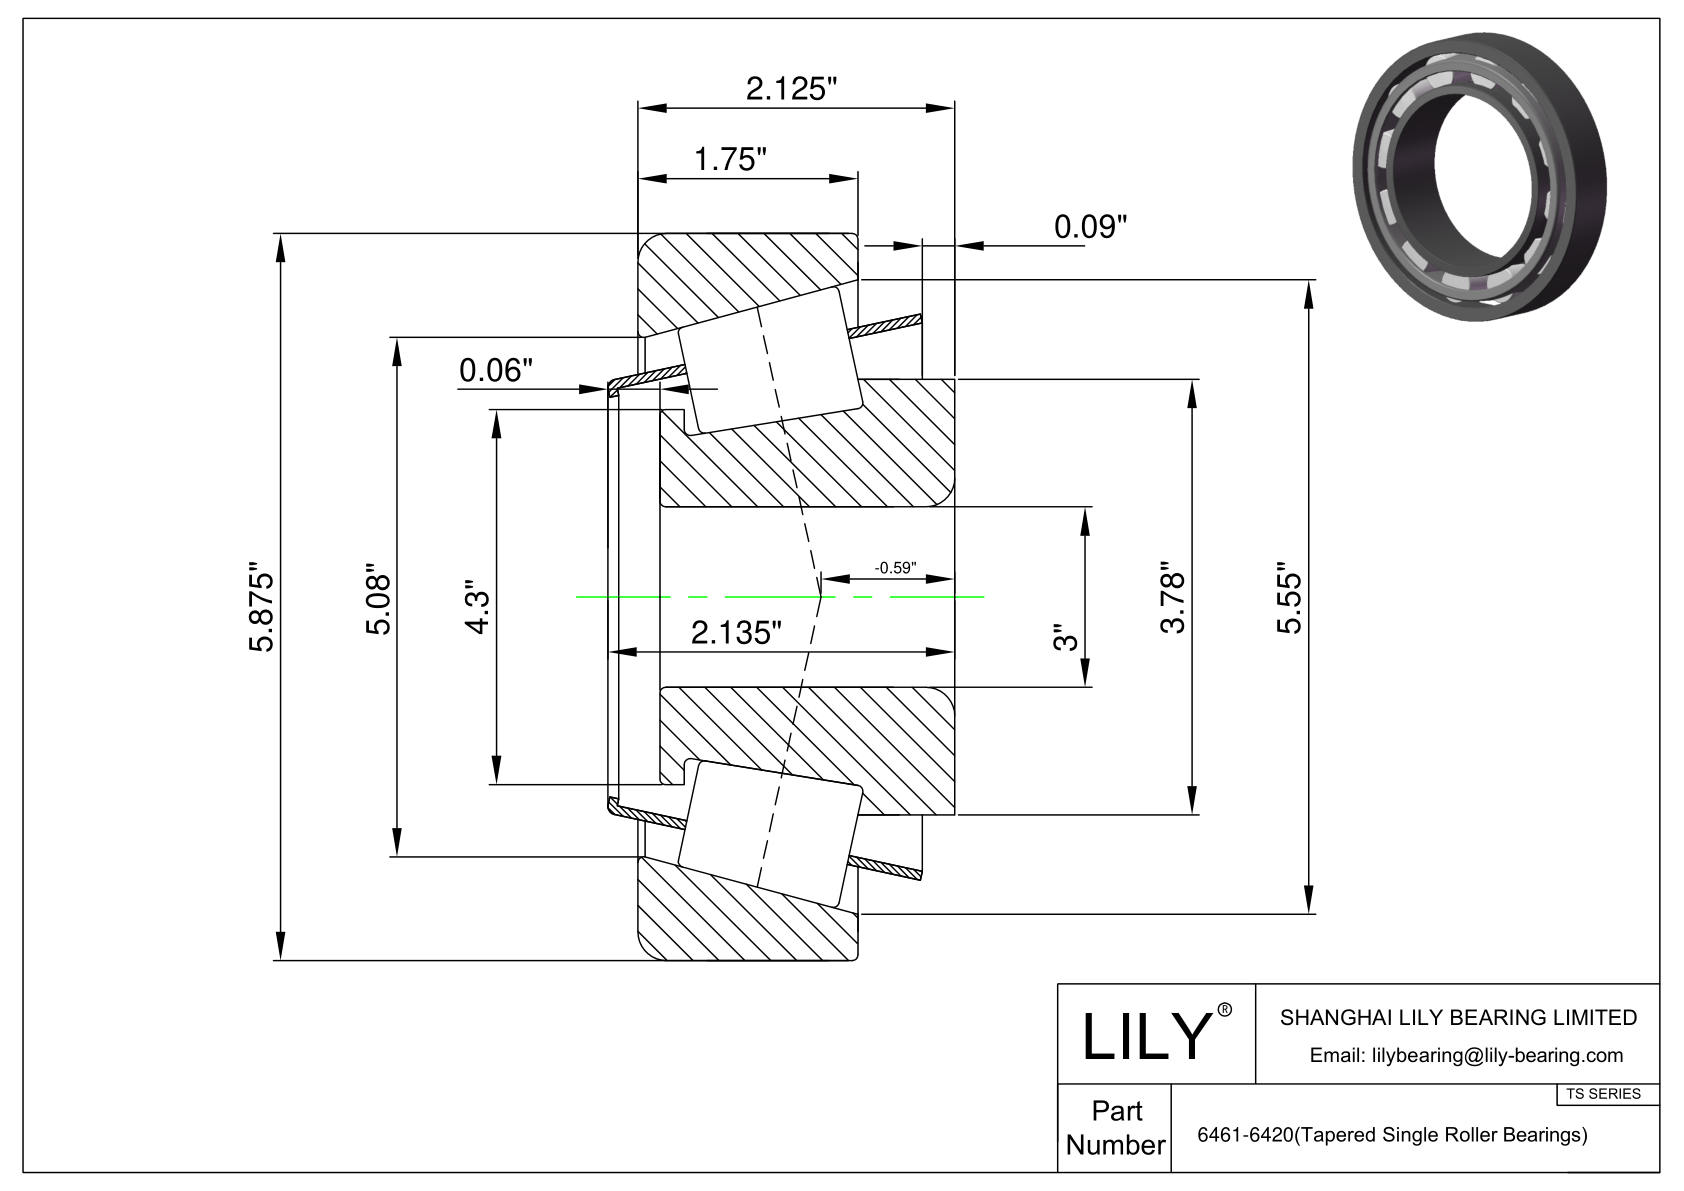 6461-6420 TS (Tapered Single Roller Bearings) (Imperial) cad drawing